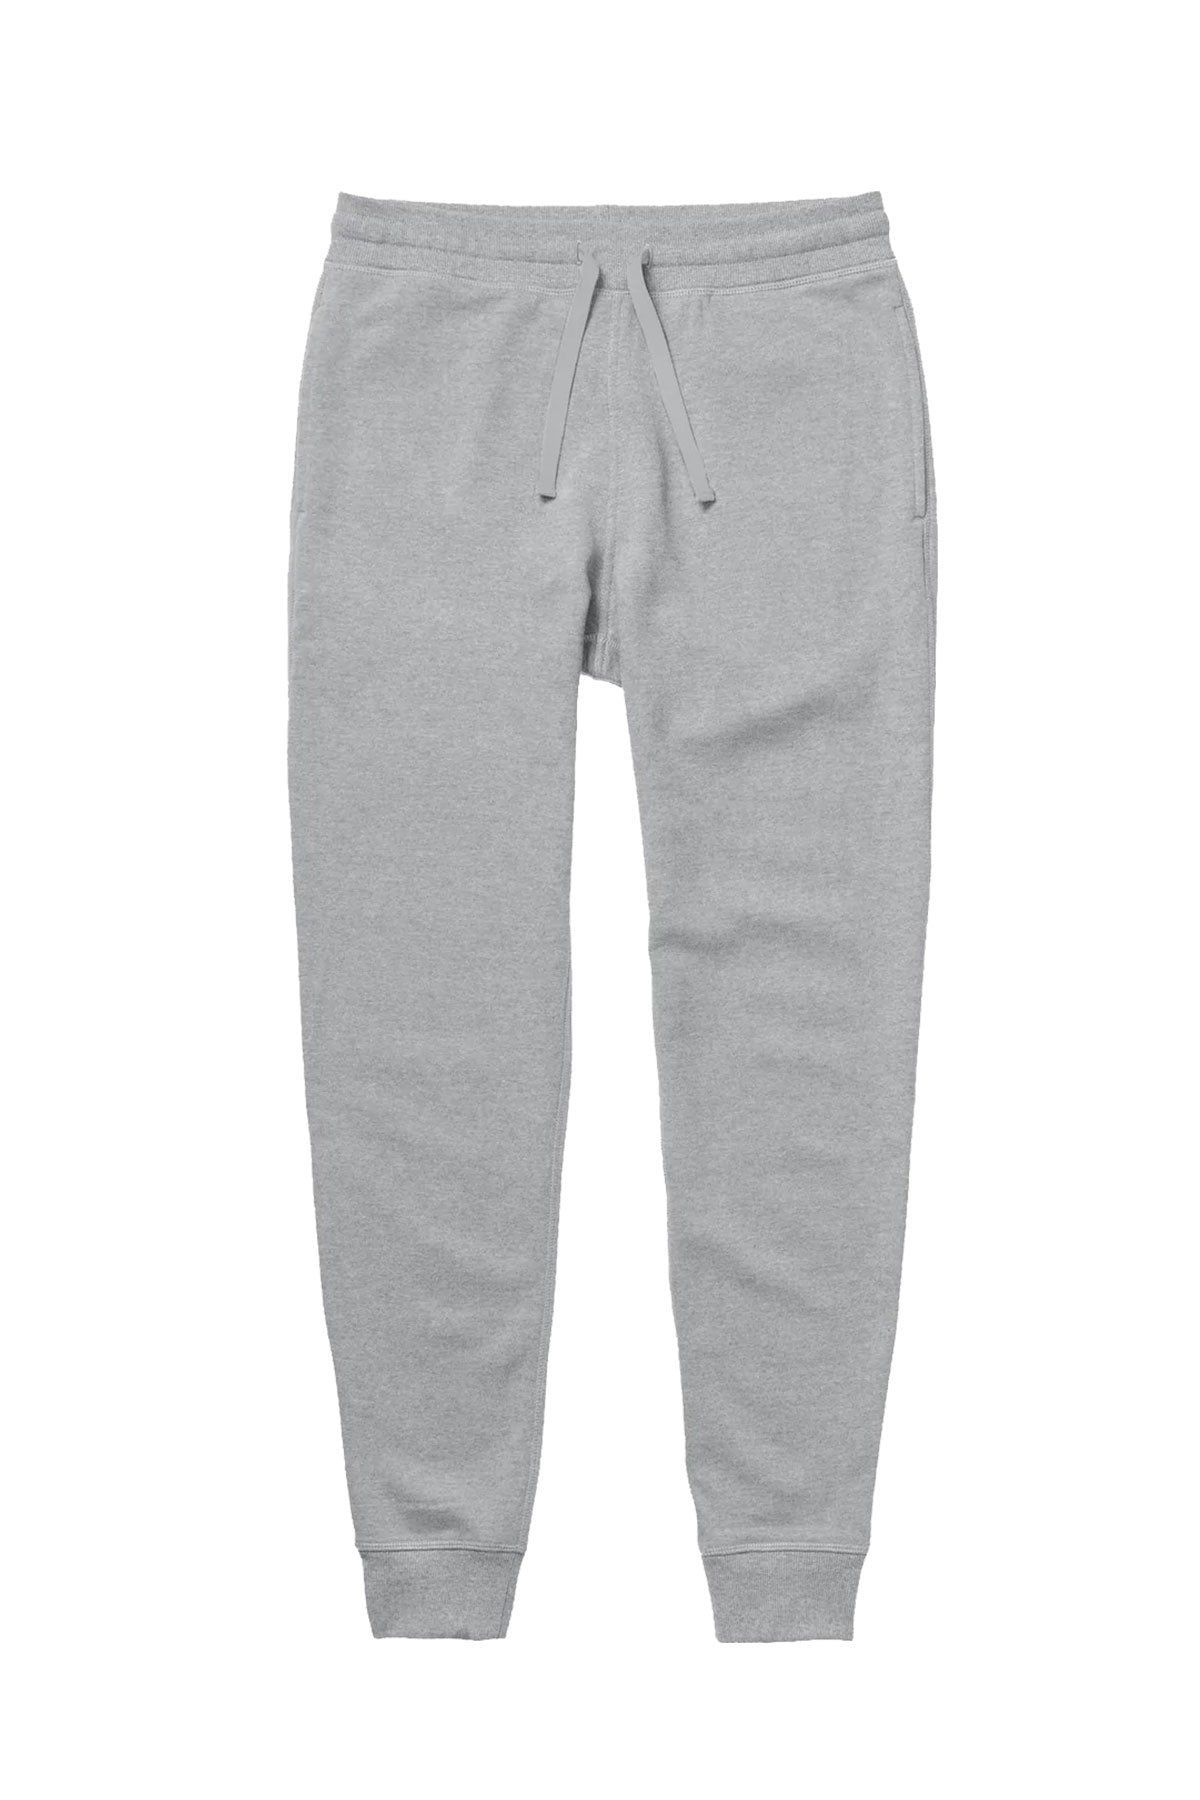 Richer Poorer - Recycled Sweatpant - Heather Grey - Flatlay